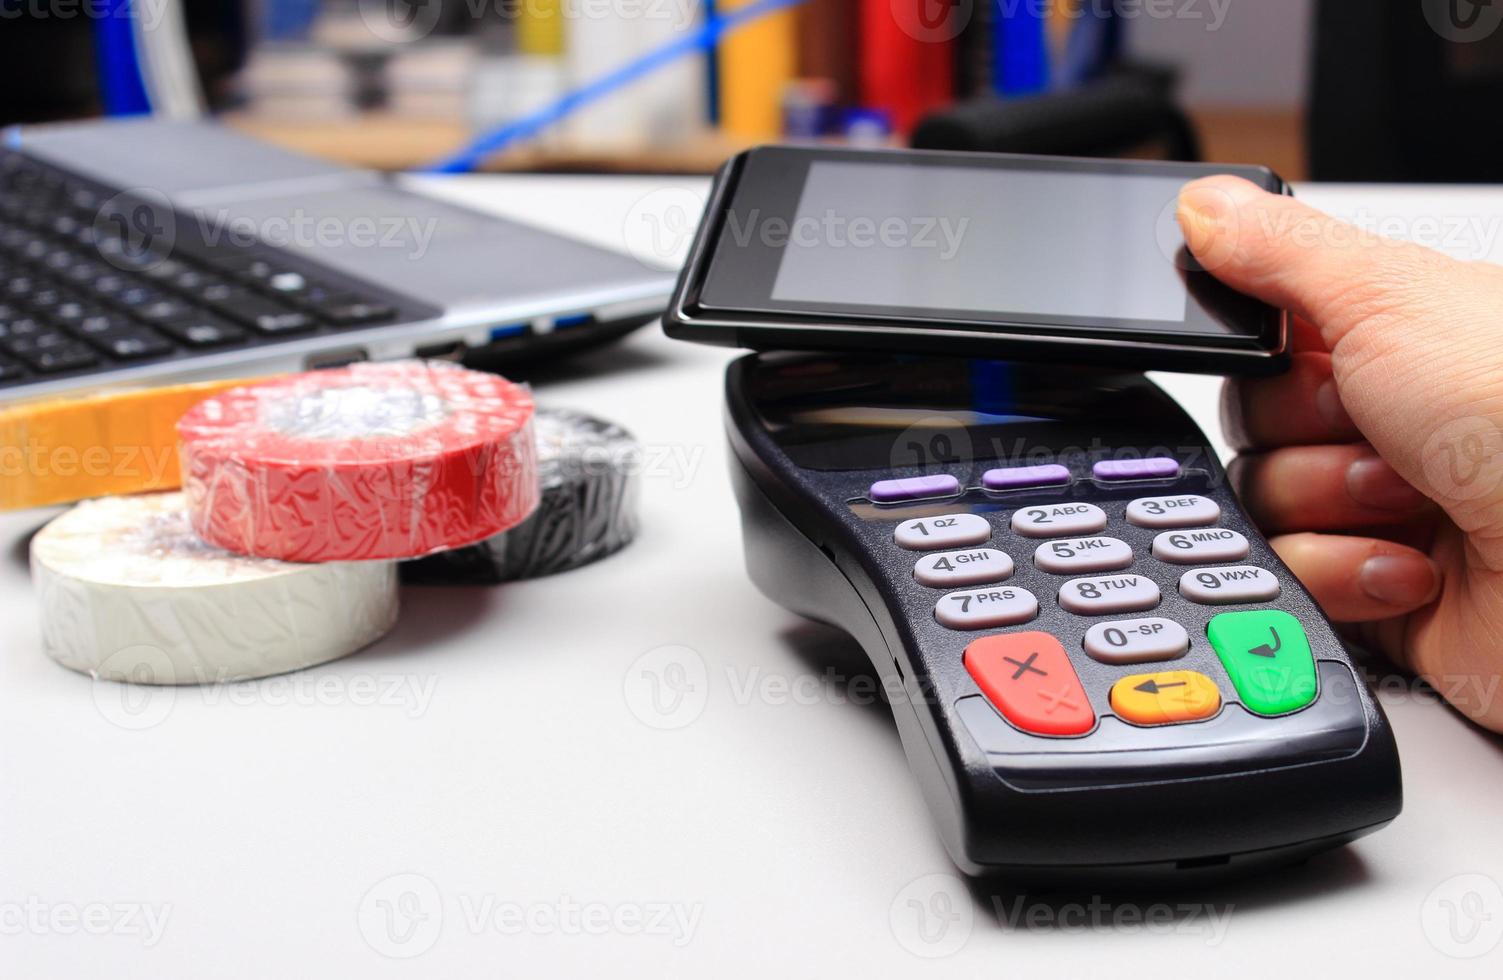 Paying with NFC technology on mobile phone photo